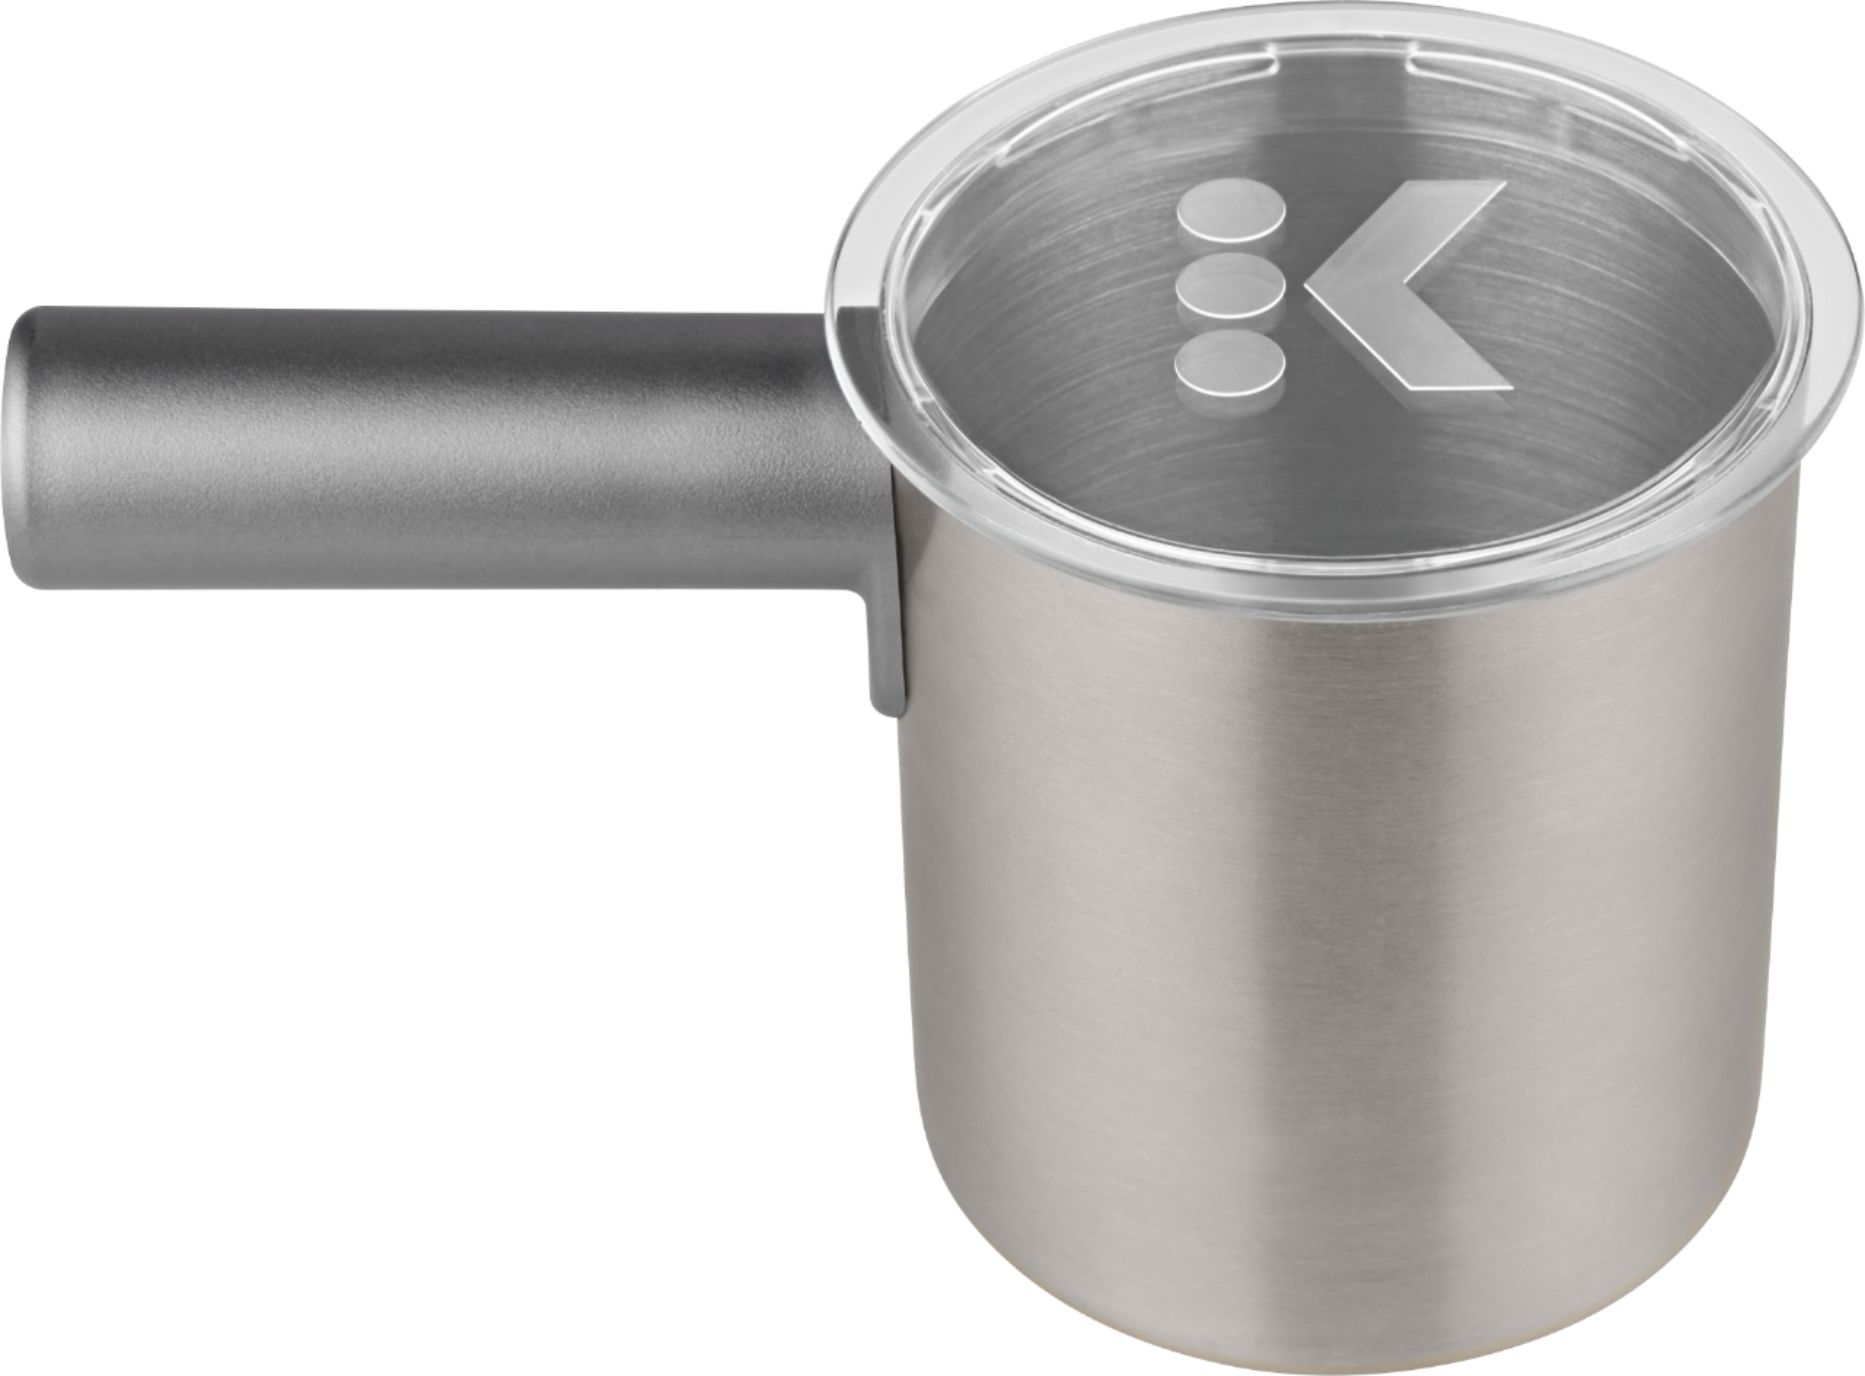 Details about   Keurig Works Non-Dairy Milk Hot and Cold Frothing One Size Nickel Frother